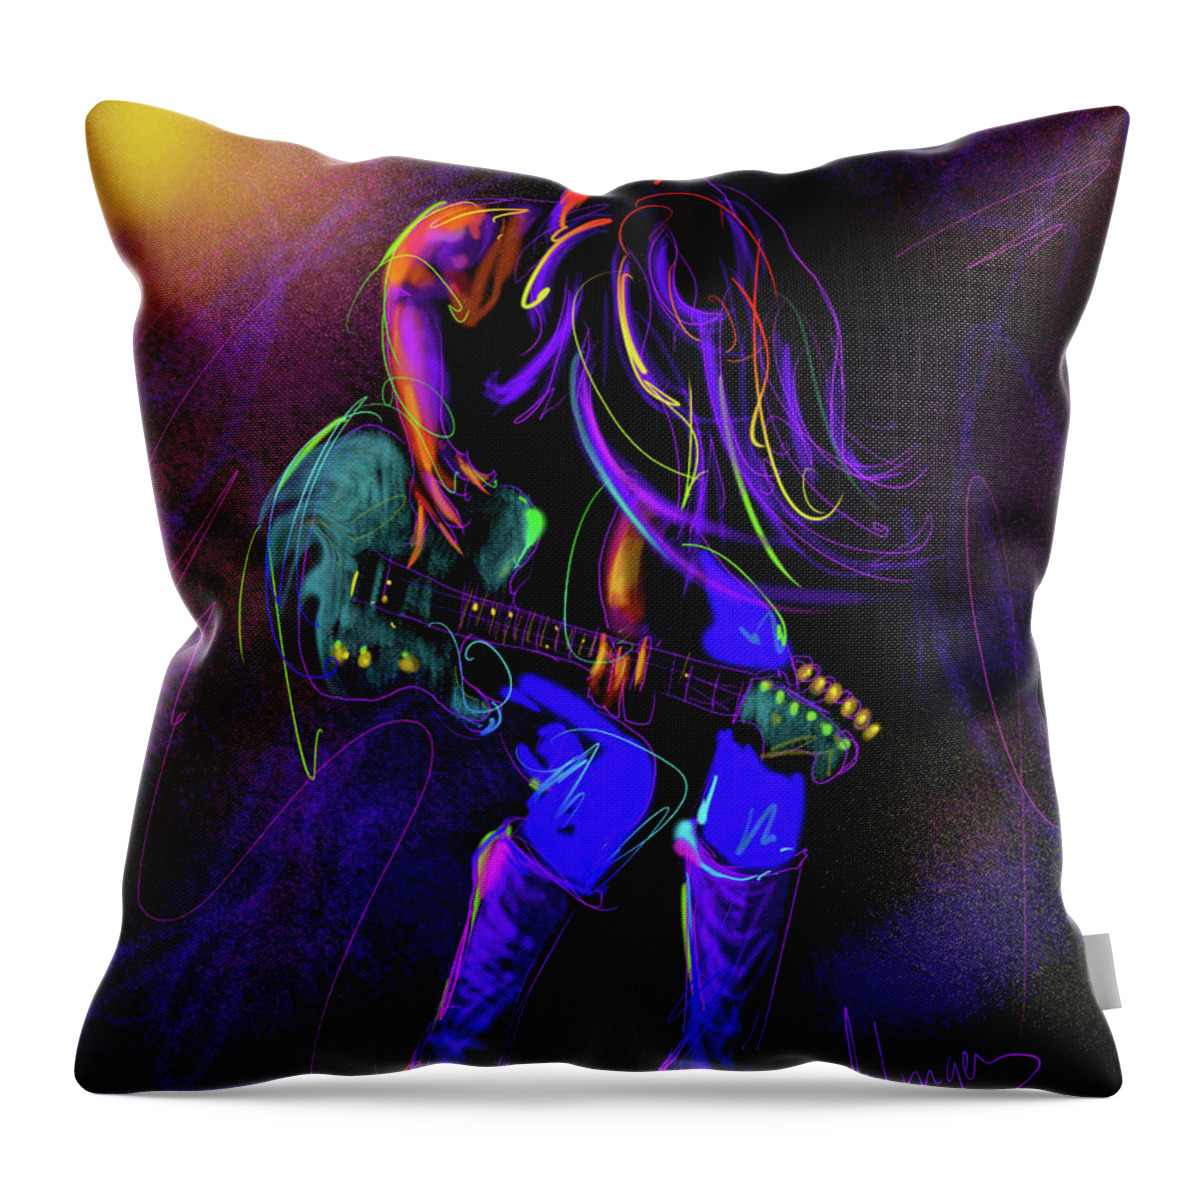 Guitar Throw Pillow featuring the painting Hair Guitar by DC Langer